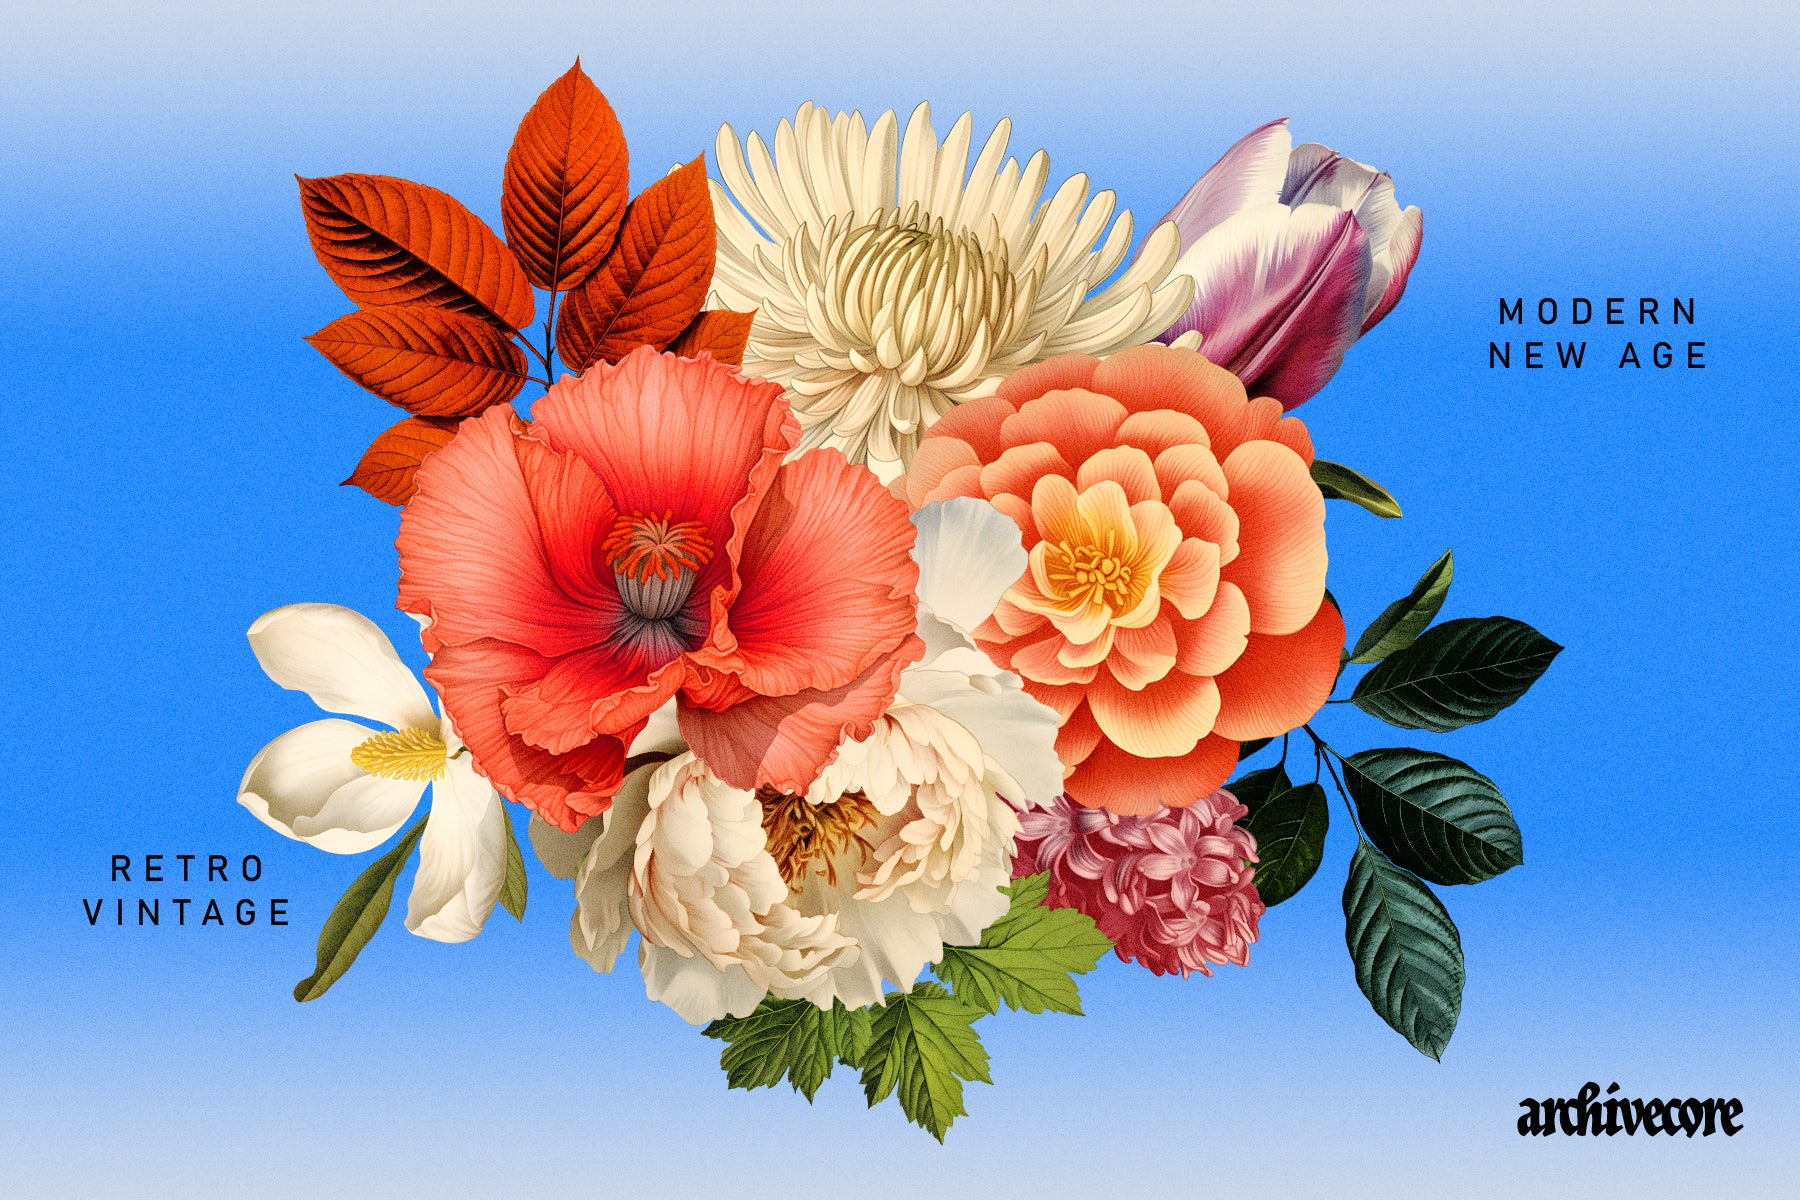 BOOK OF FLOWERS 2 Clipart